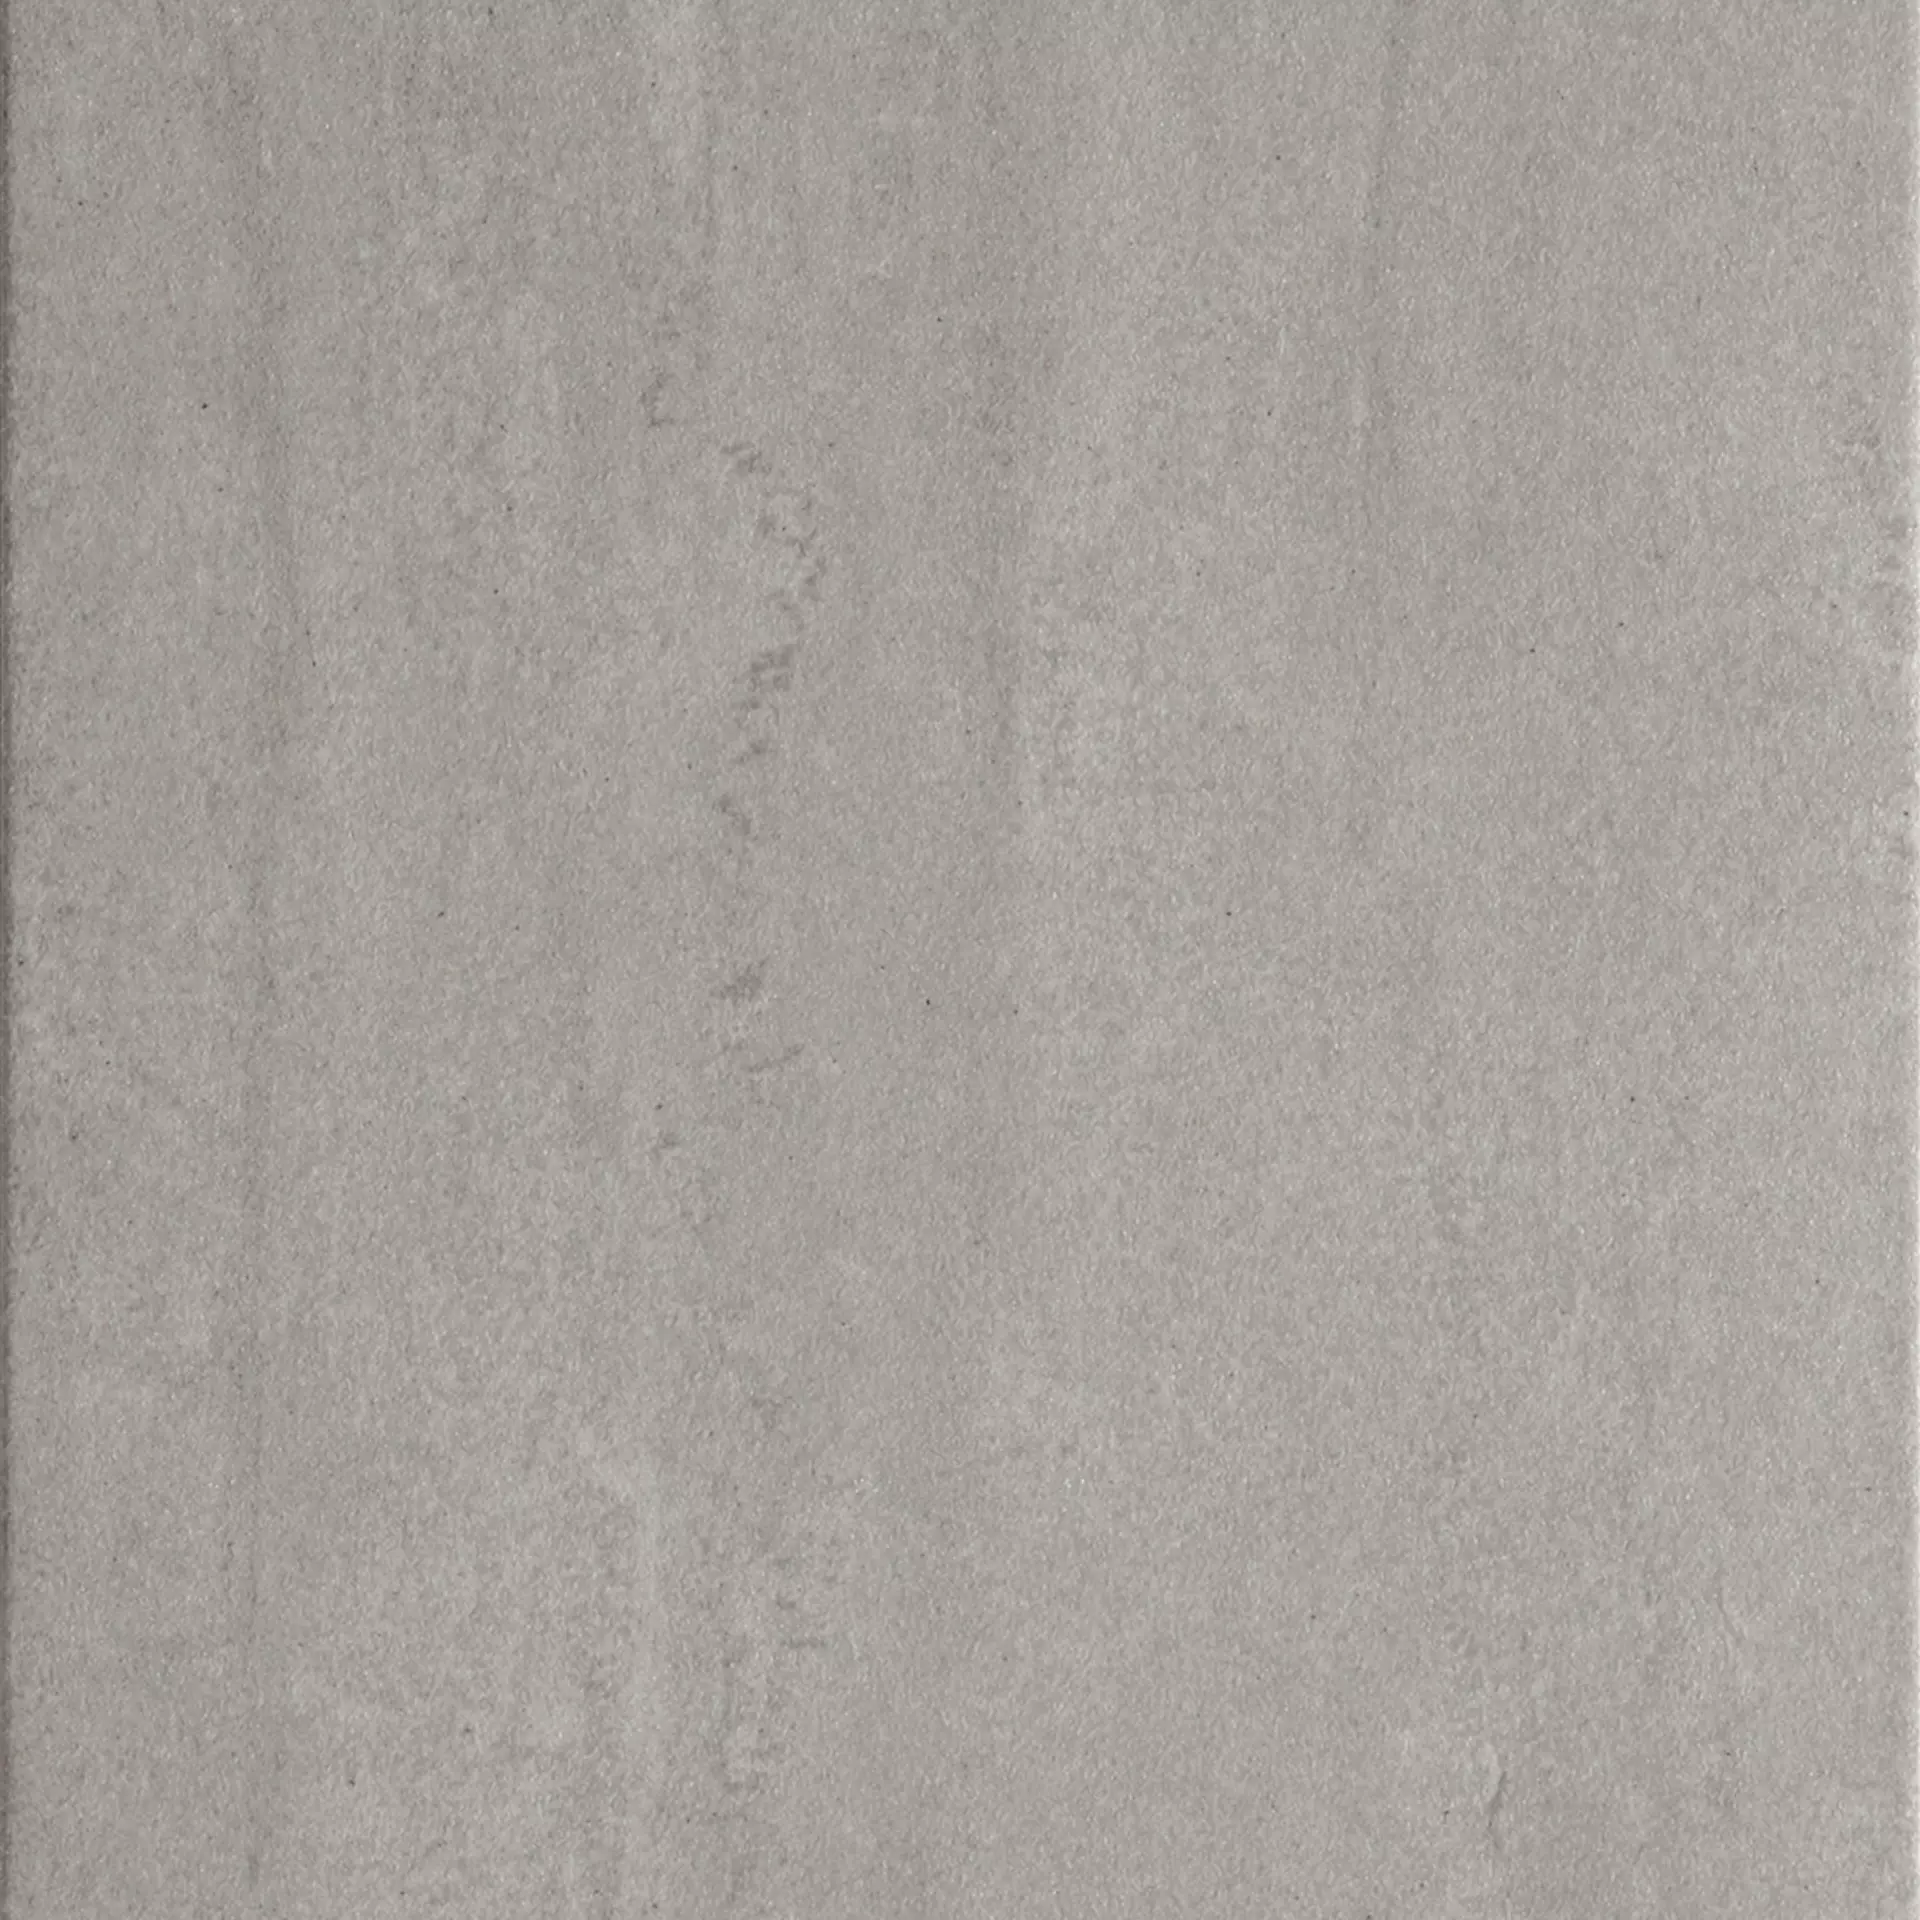 Rondine Contract Silver Naturale J84033 60x60cm rectified 9,5mm